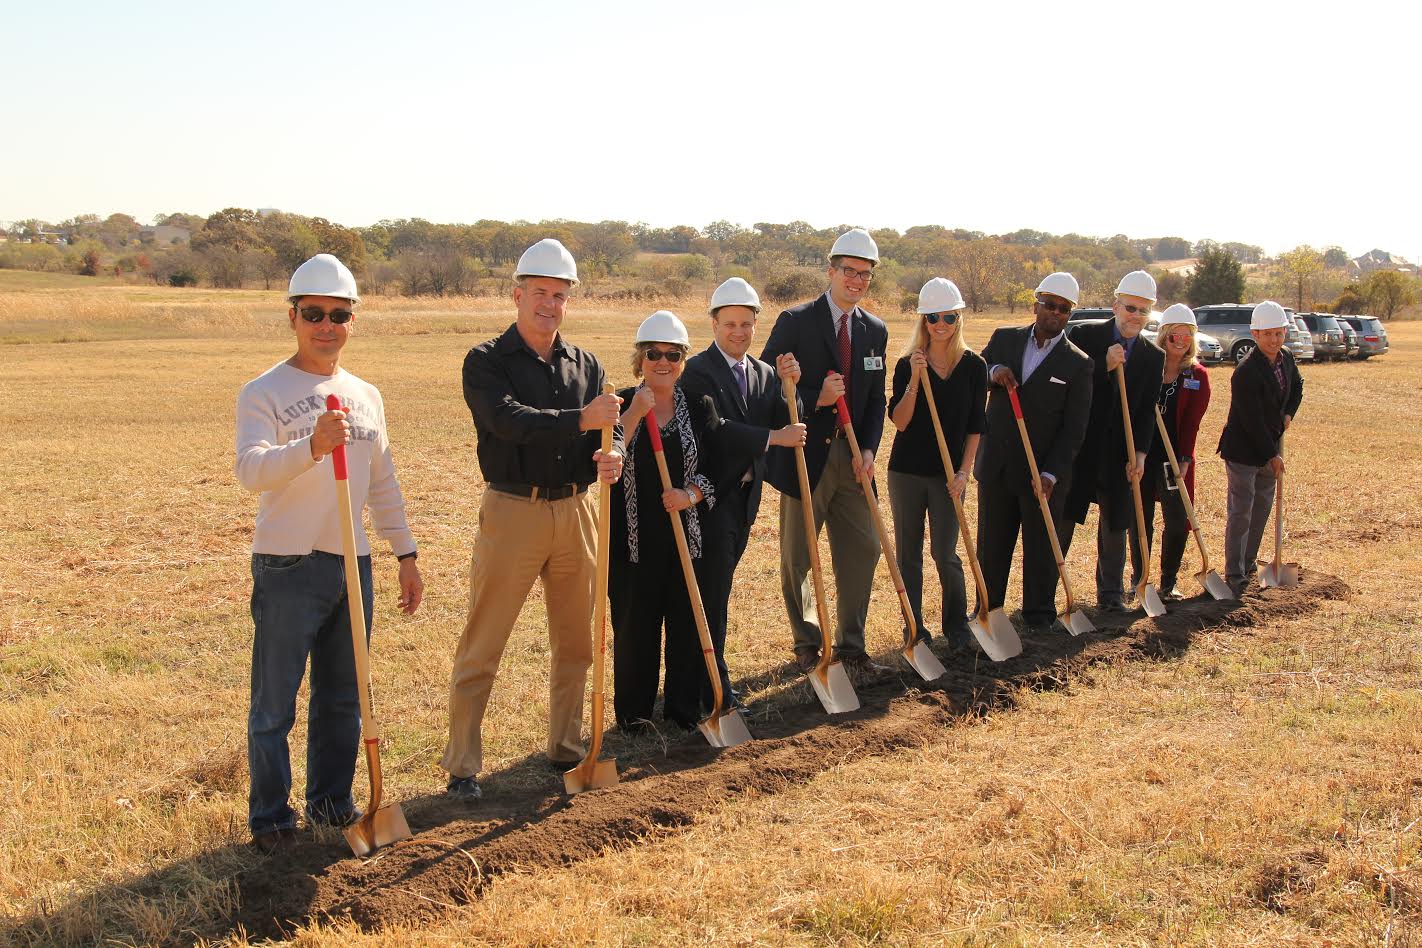 Founders Classical Academy of Flower Mound to Break Ground at Site of New K-12 Campus